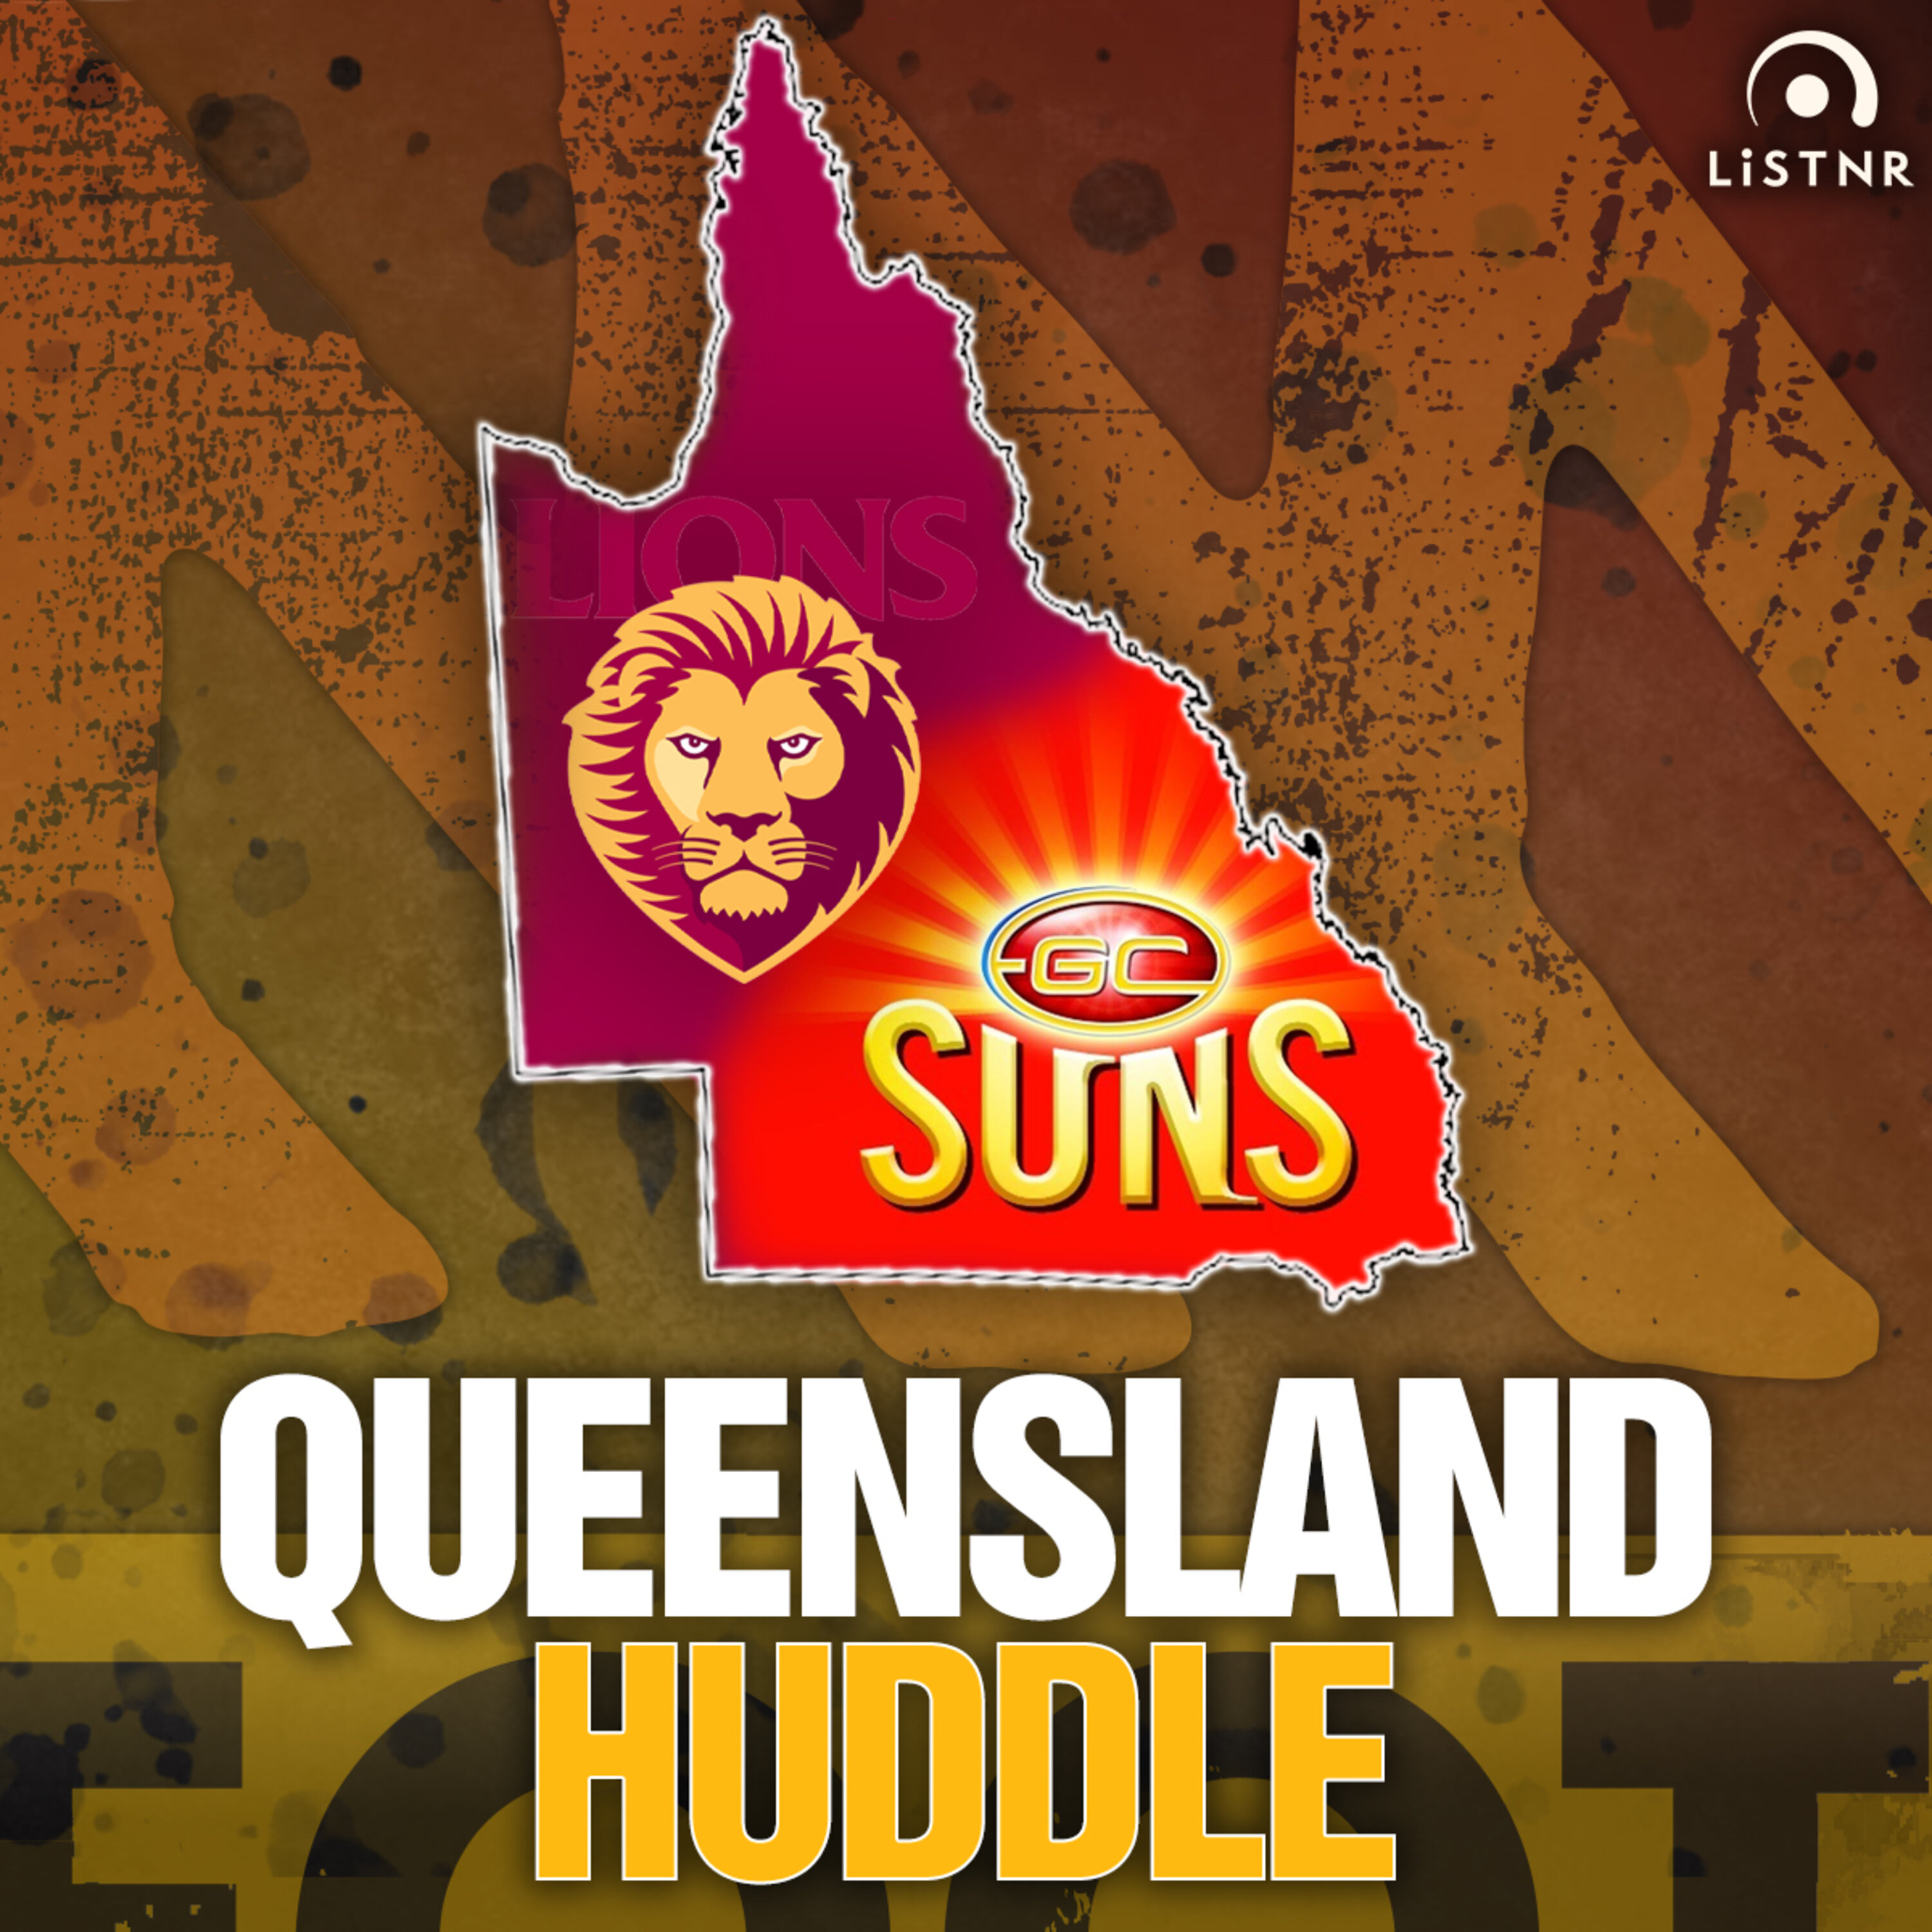 Queensland Huddle | Lions outrun by Hawthorn, do we have faith in Brisbane's flag credentials, will the Suns make Michael Voss unemployed this weekend?